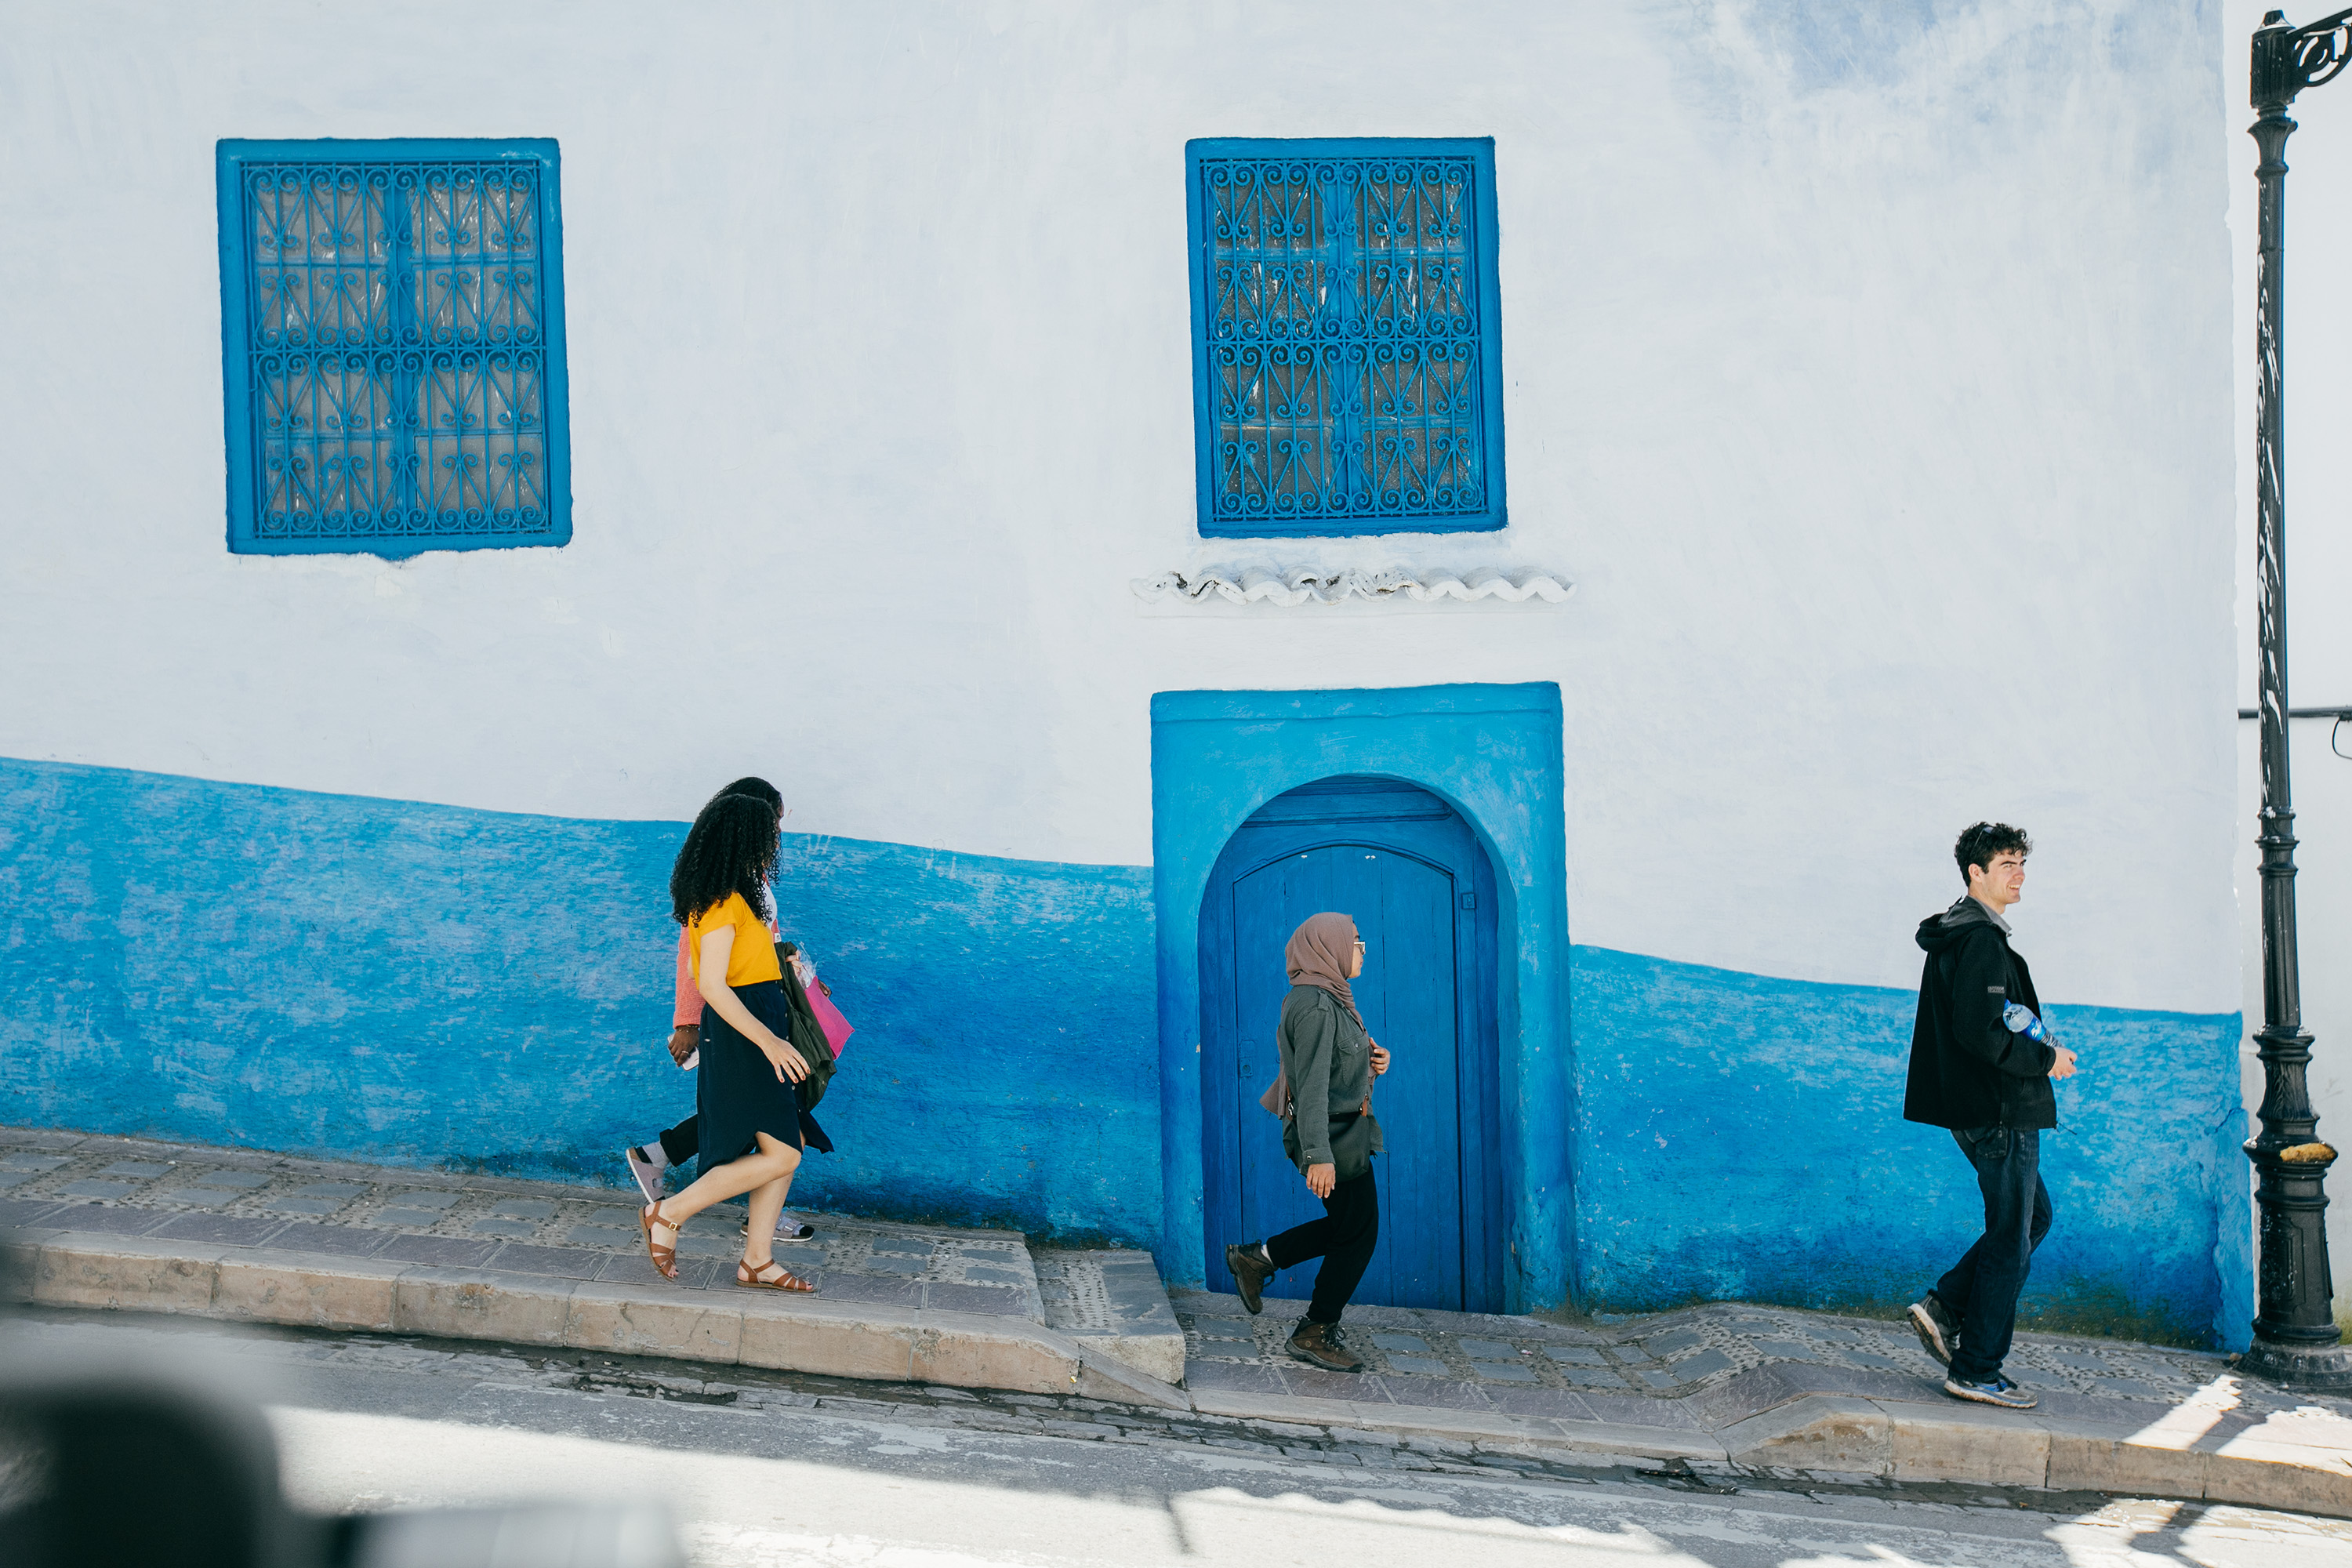 Students walking in Morocco.